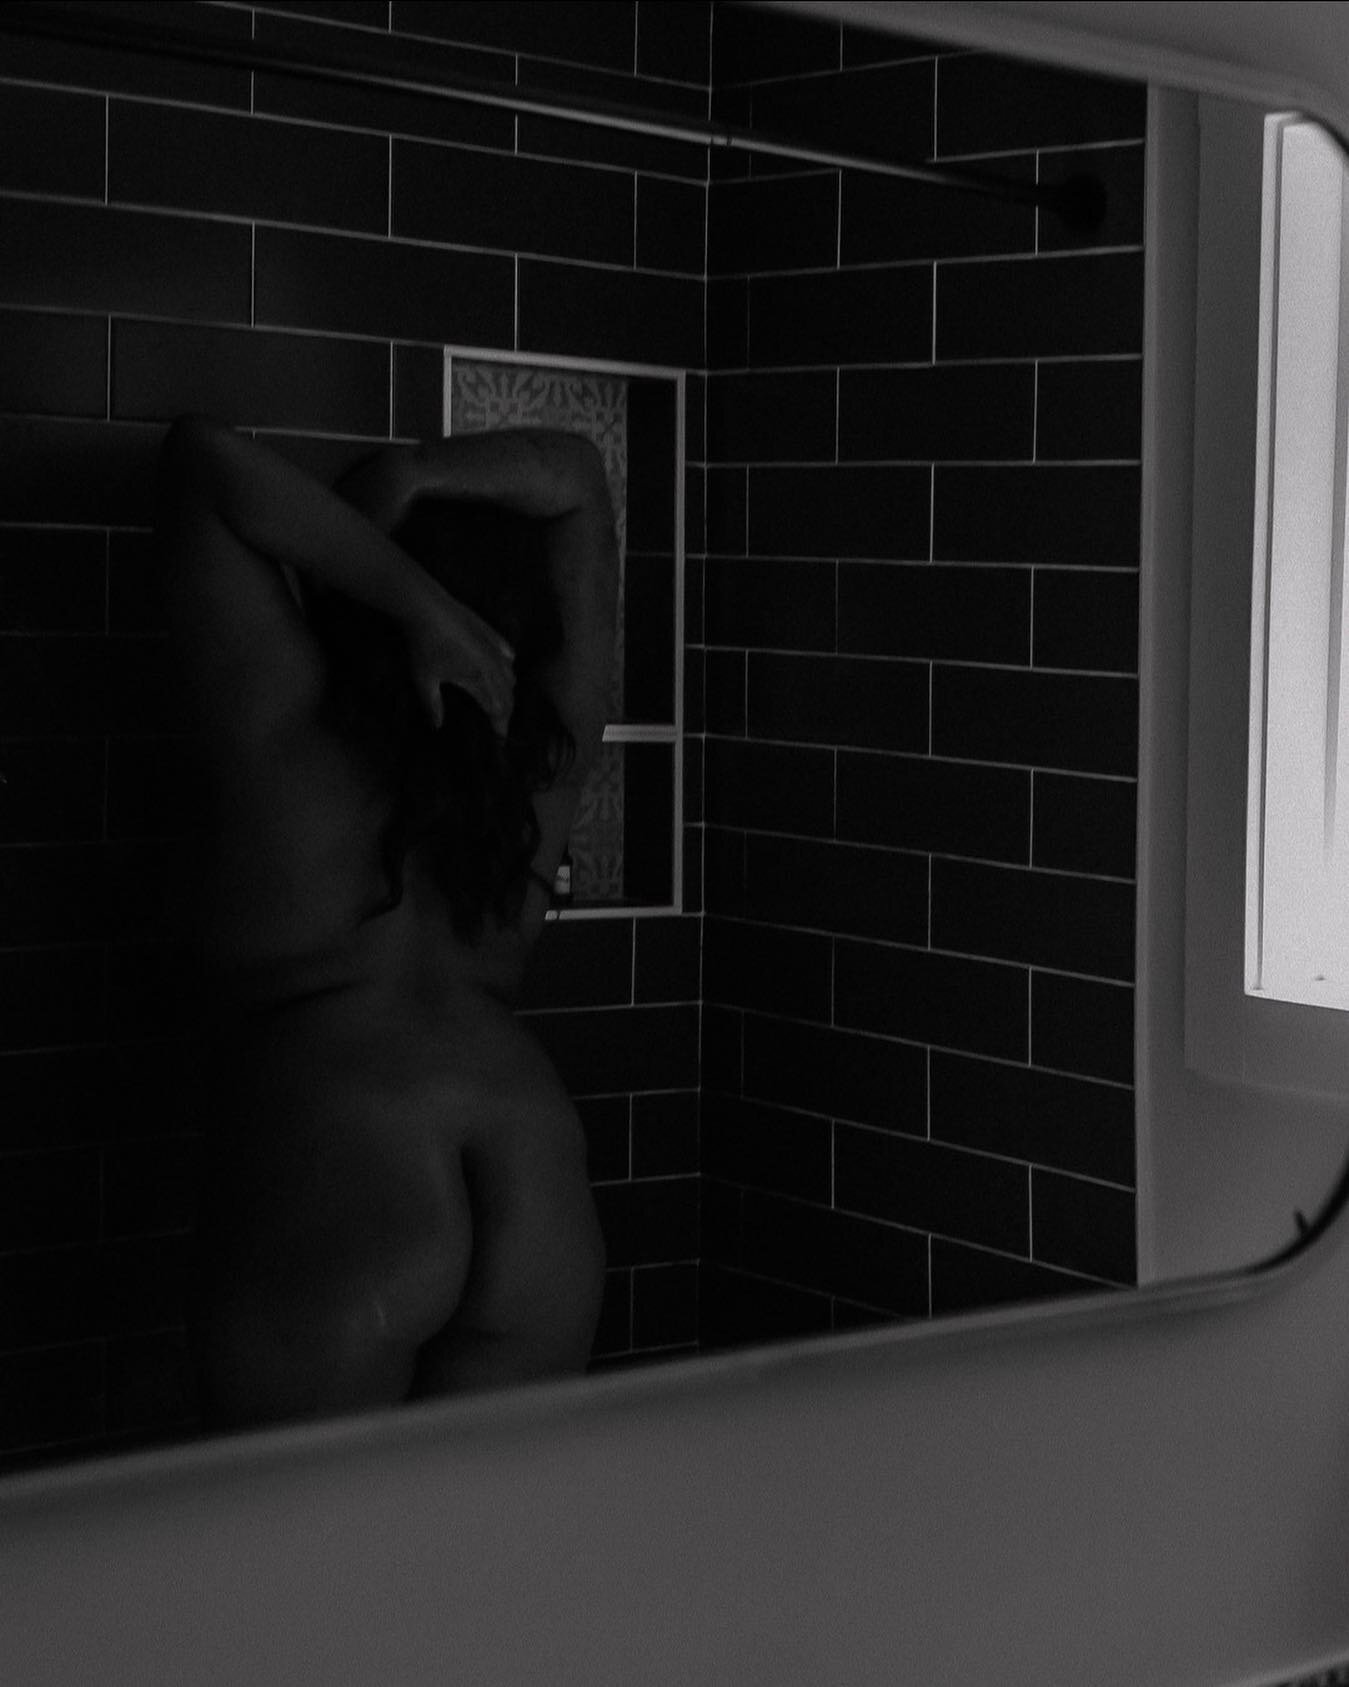 The simple pleasure of a sensual shower-
⠀⠀⠀⠀⠀⠀⠀⠀⠀
Being my go-to self love ritual for depressy days, I love directing every touch, breath, and movement of a sensual shower scene. 
⠀⠀⠀⠀⠀⠀⠀⠀⠀
The warmth of the water on your bare skin. 
The tingle of t